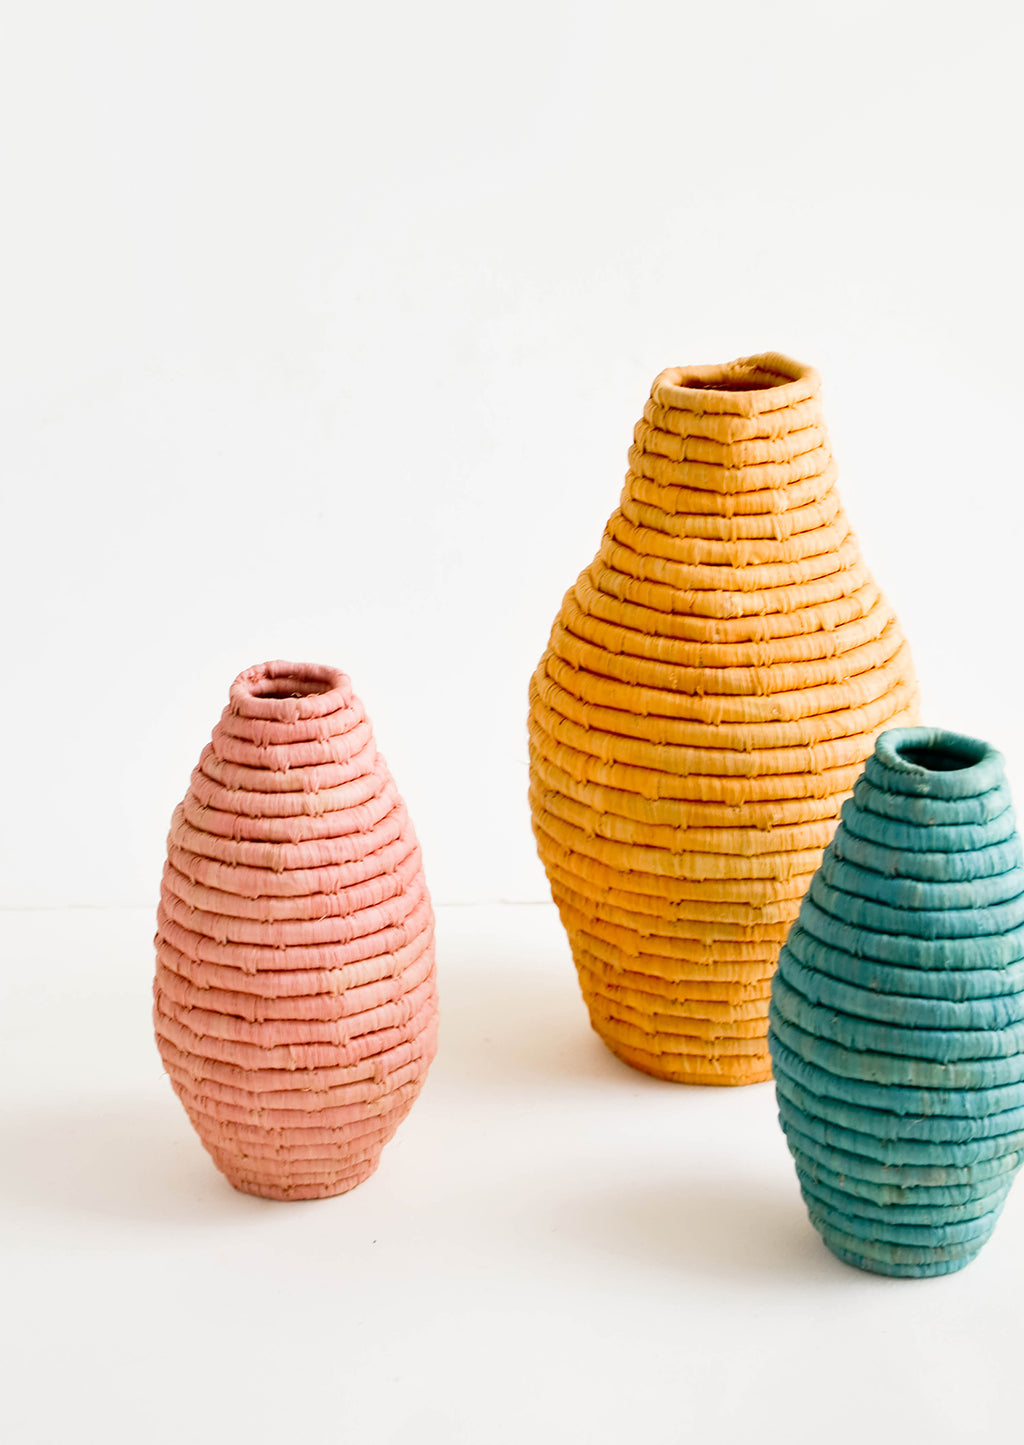 1: Three vases in varying sizes, made from horizontal coils of woven natural grass